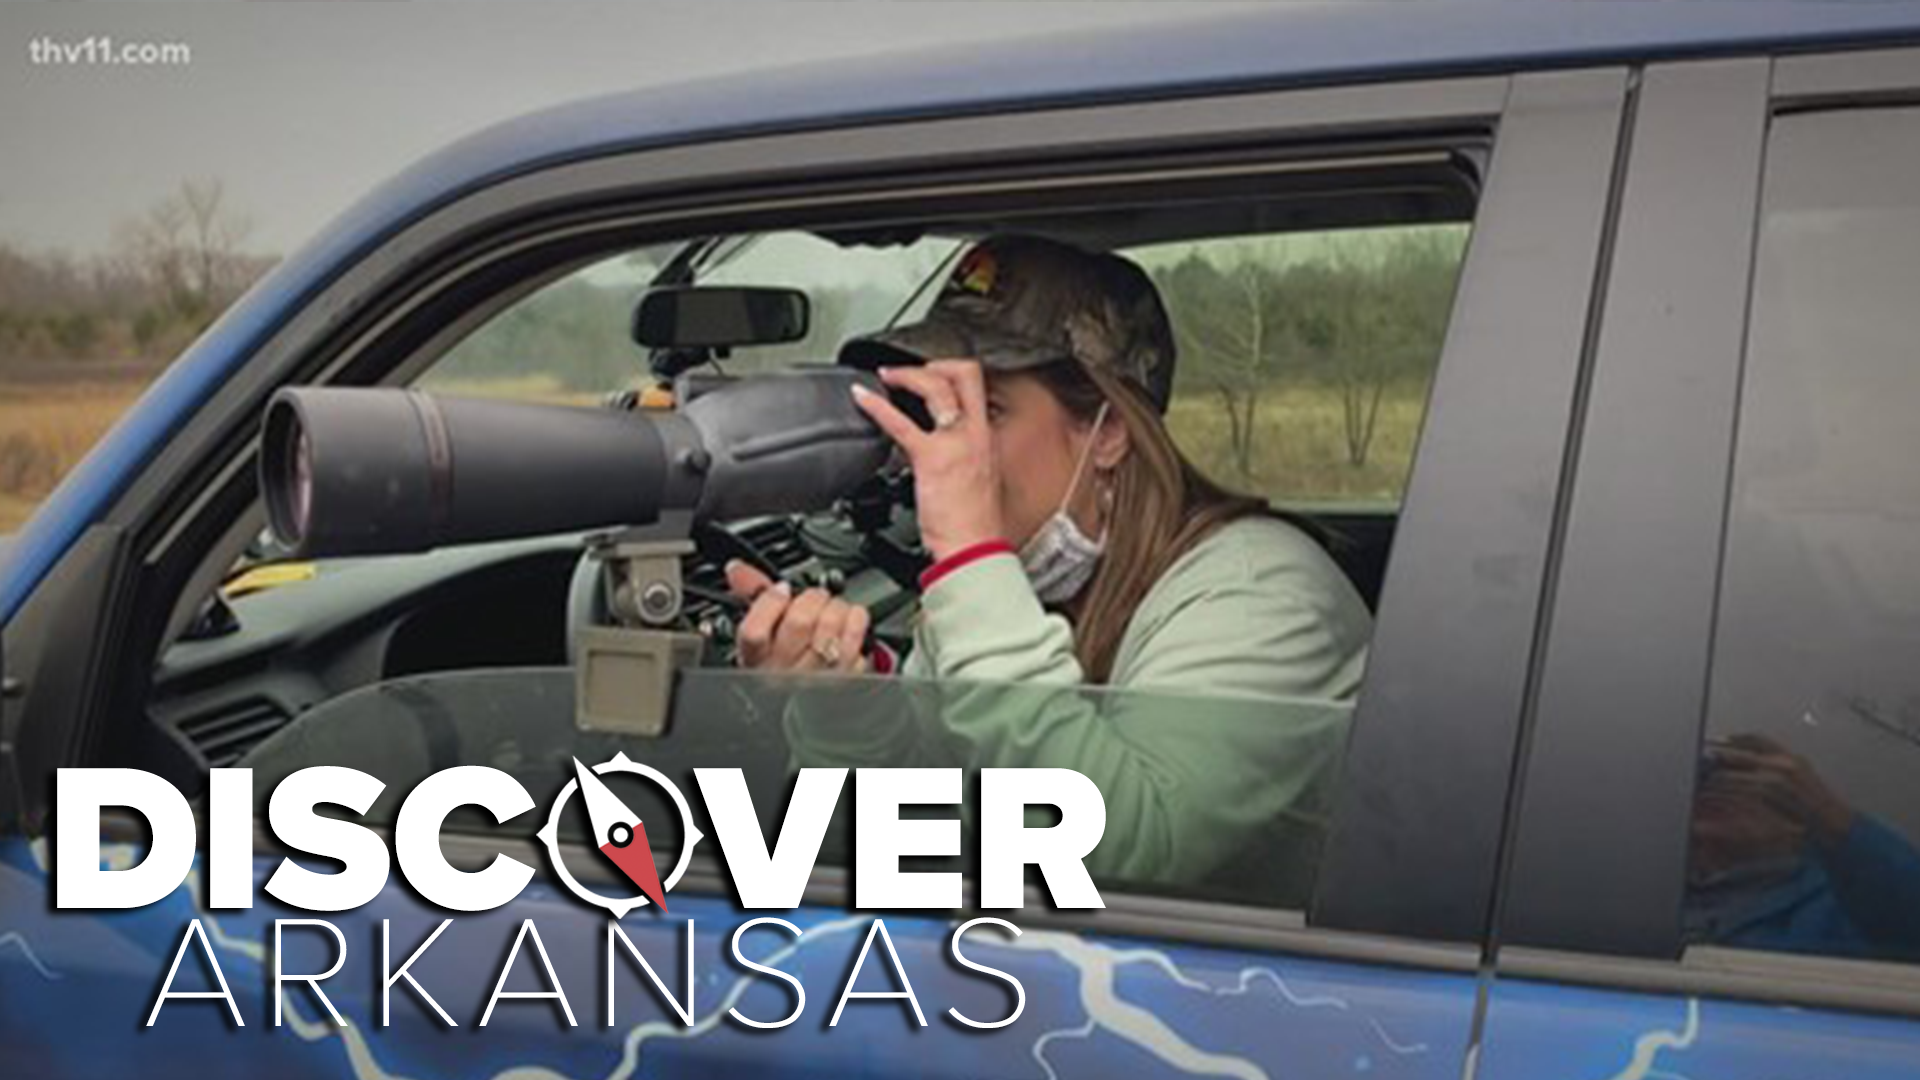 Every Wednesday, Theba Lolley and Ashley King get to share their Discover Arkansas adventure with you. Today, we've got a sneak peek!